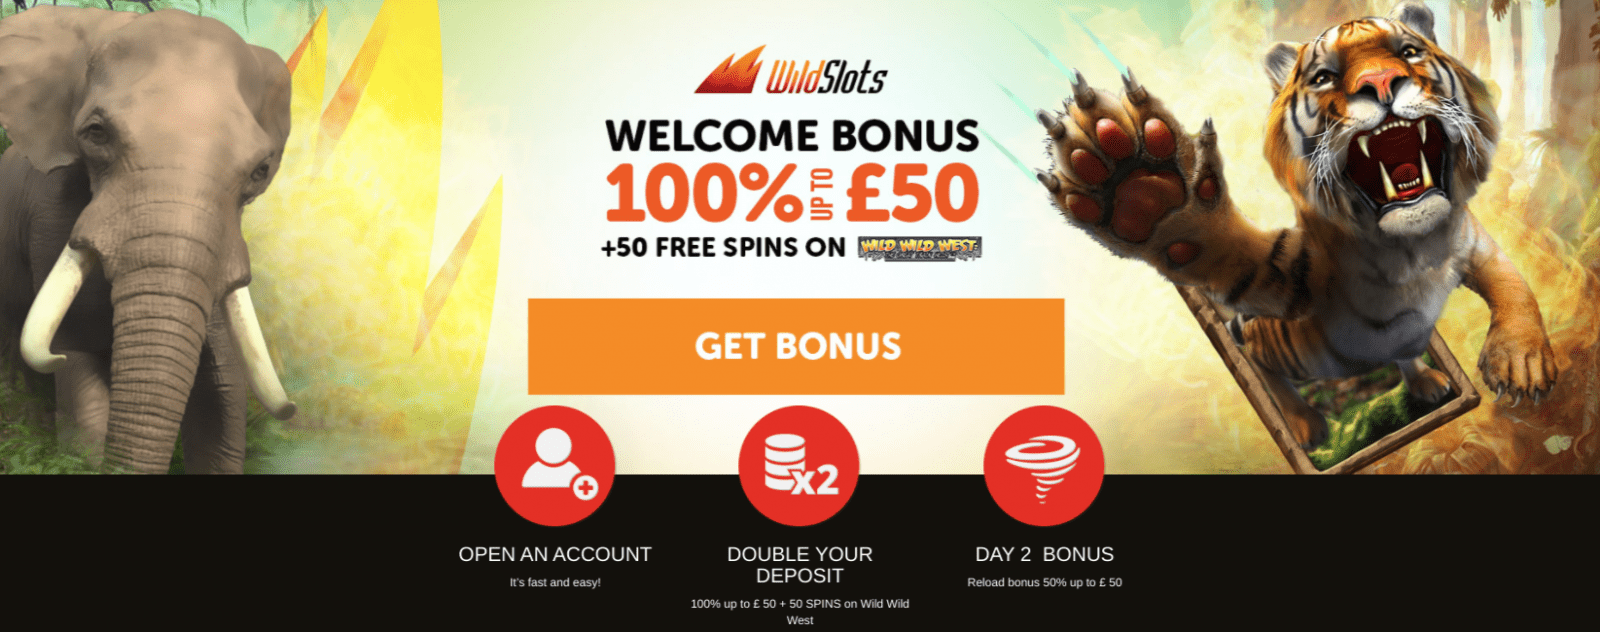 WildSlots welcome bonus banner with a tiger and an elephant